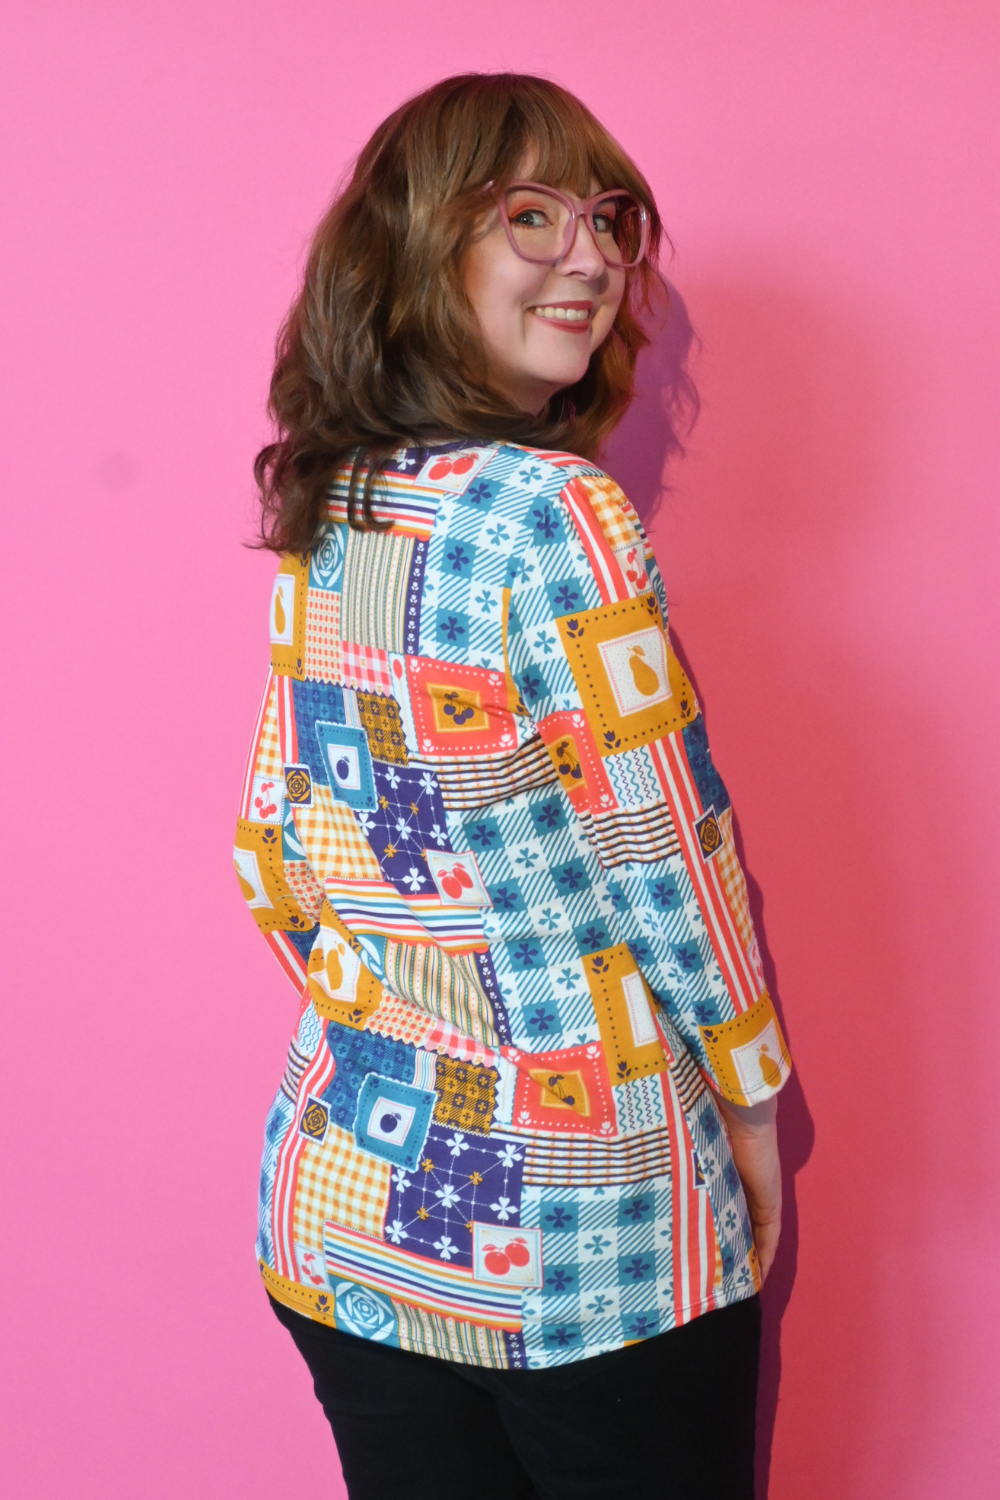 Back view of redhead model in glasses wearing 3/4 sleeve tee featuring colorful patchwork